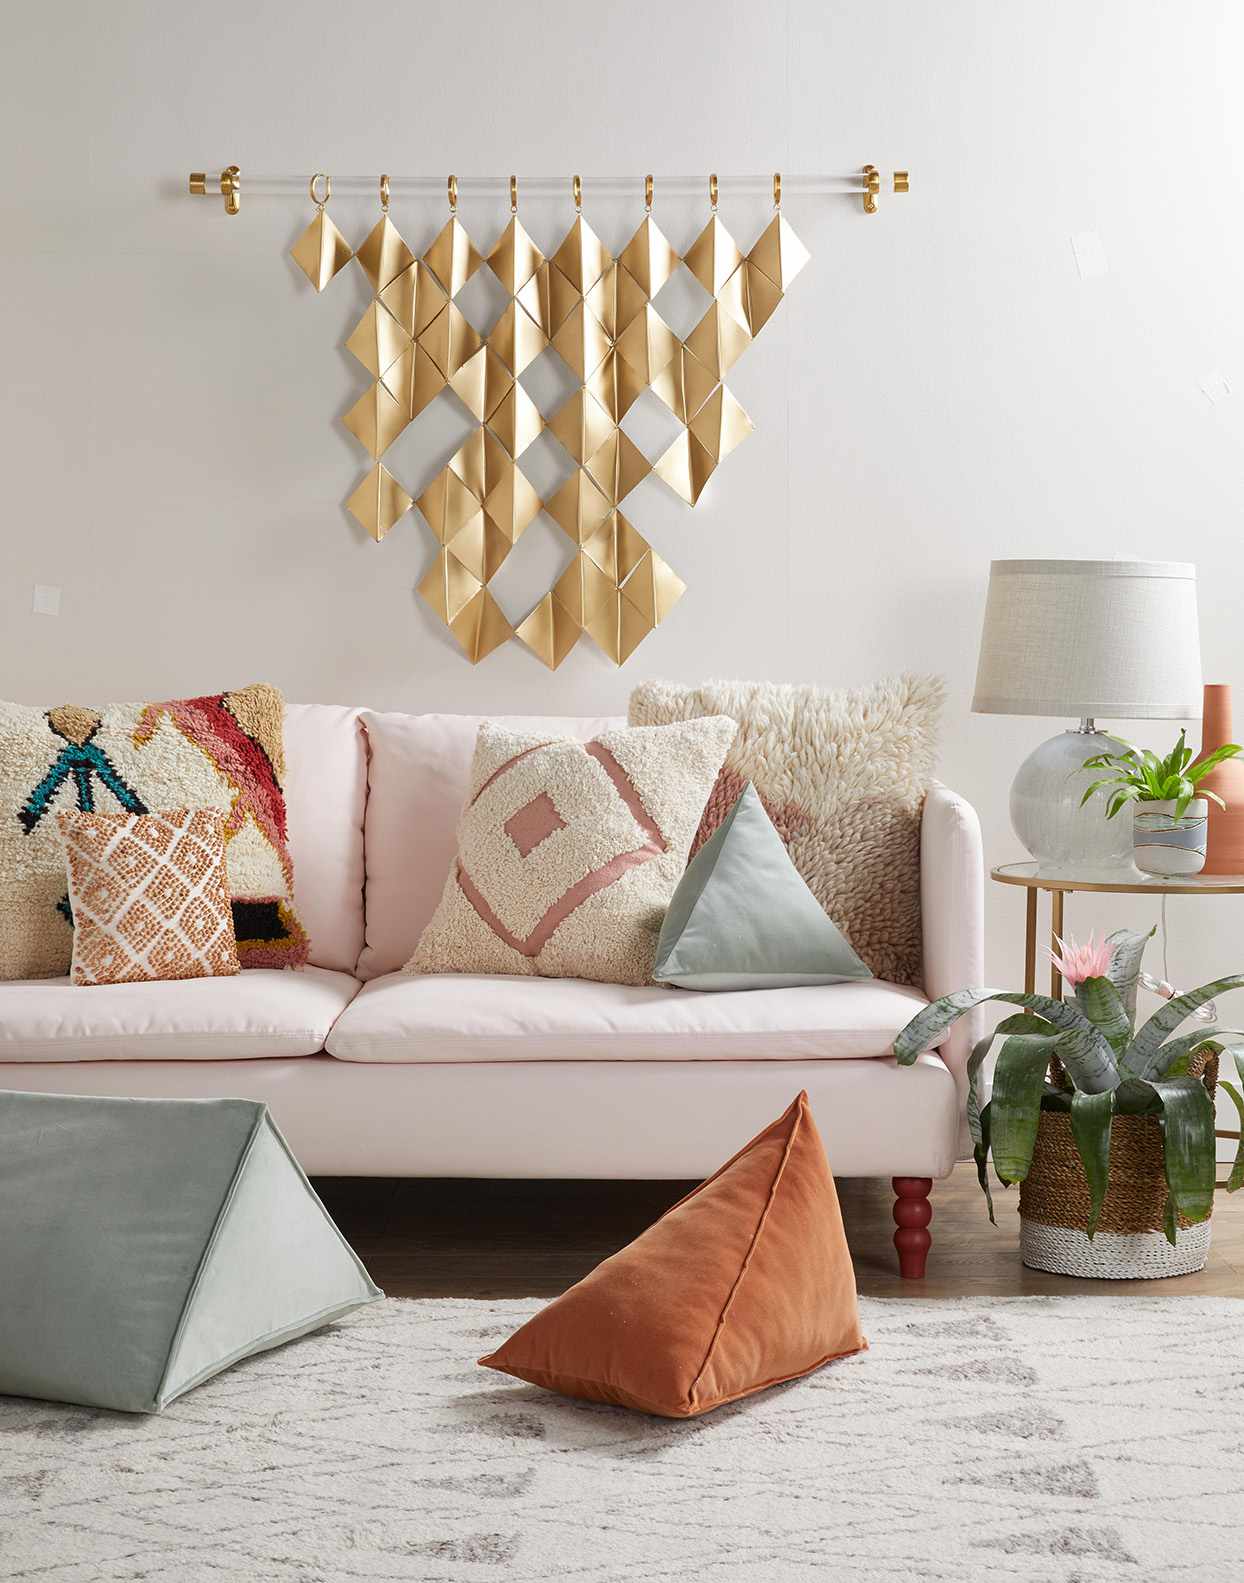 Gold wall hanging above pink sofa in living room